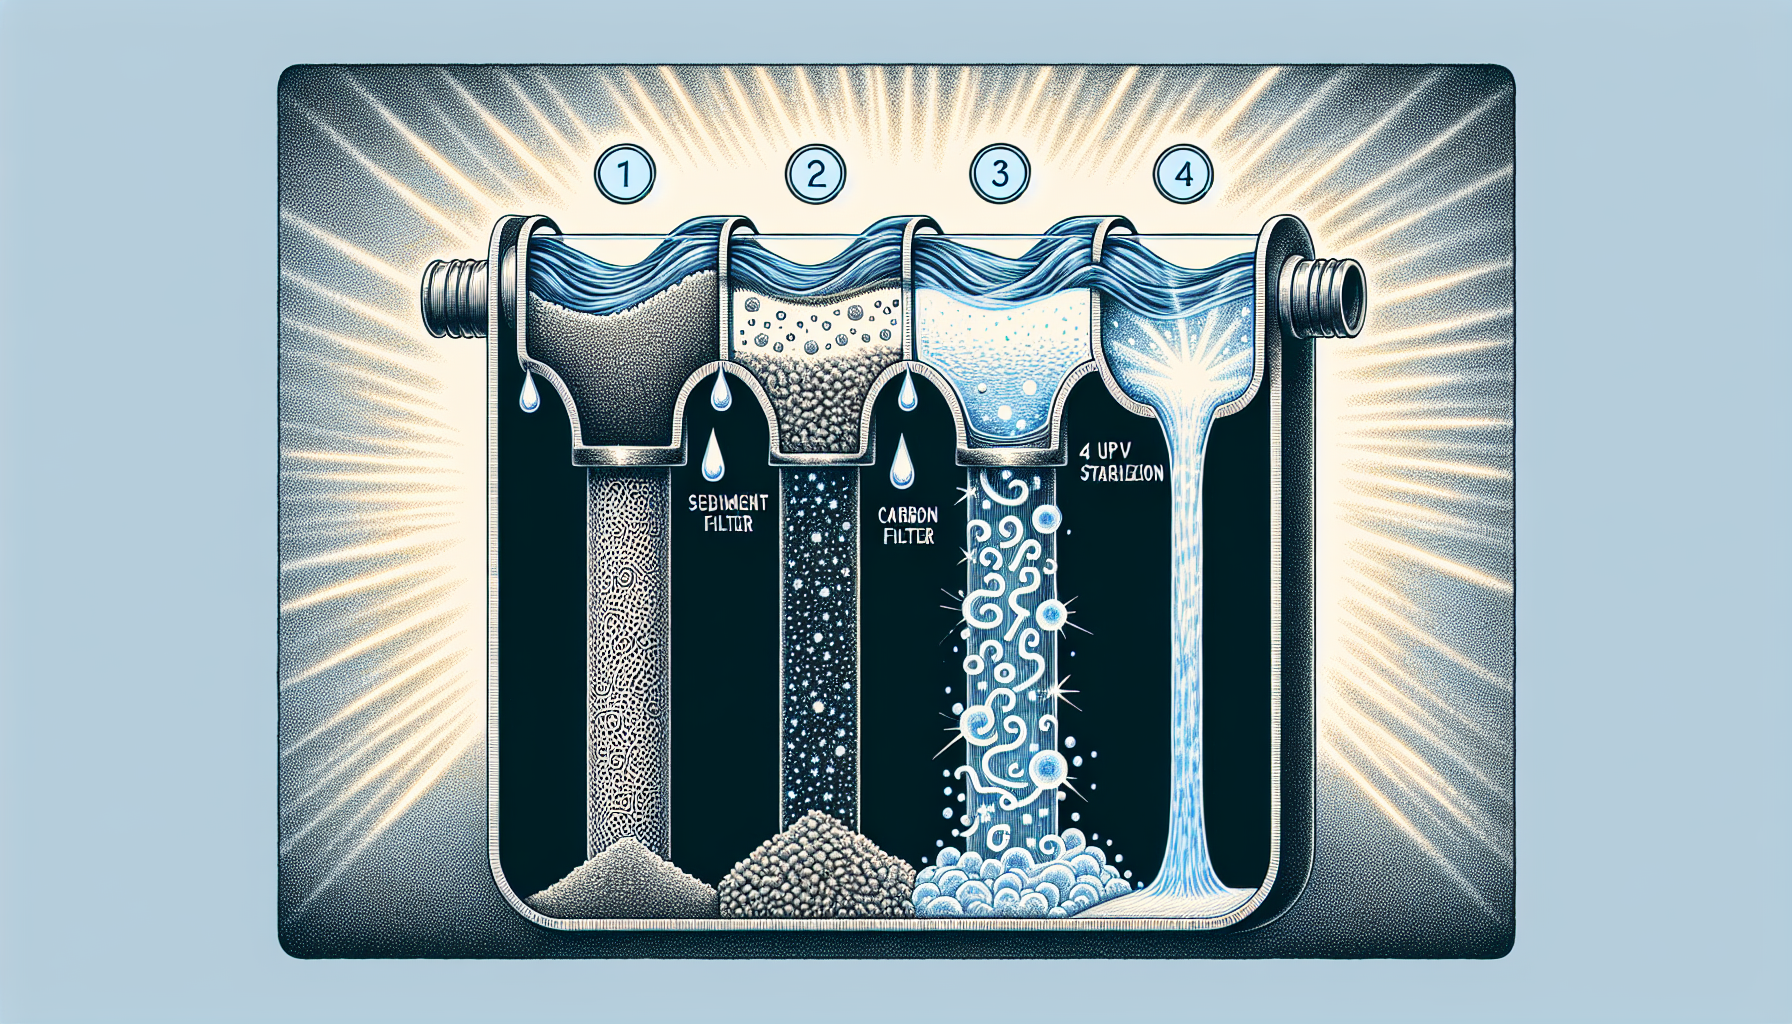 4-Stage Water Treatment Process Illustration